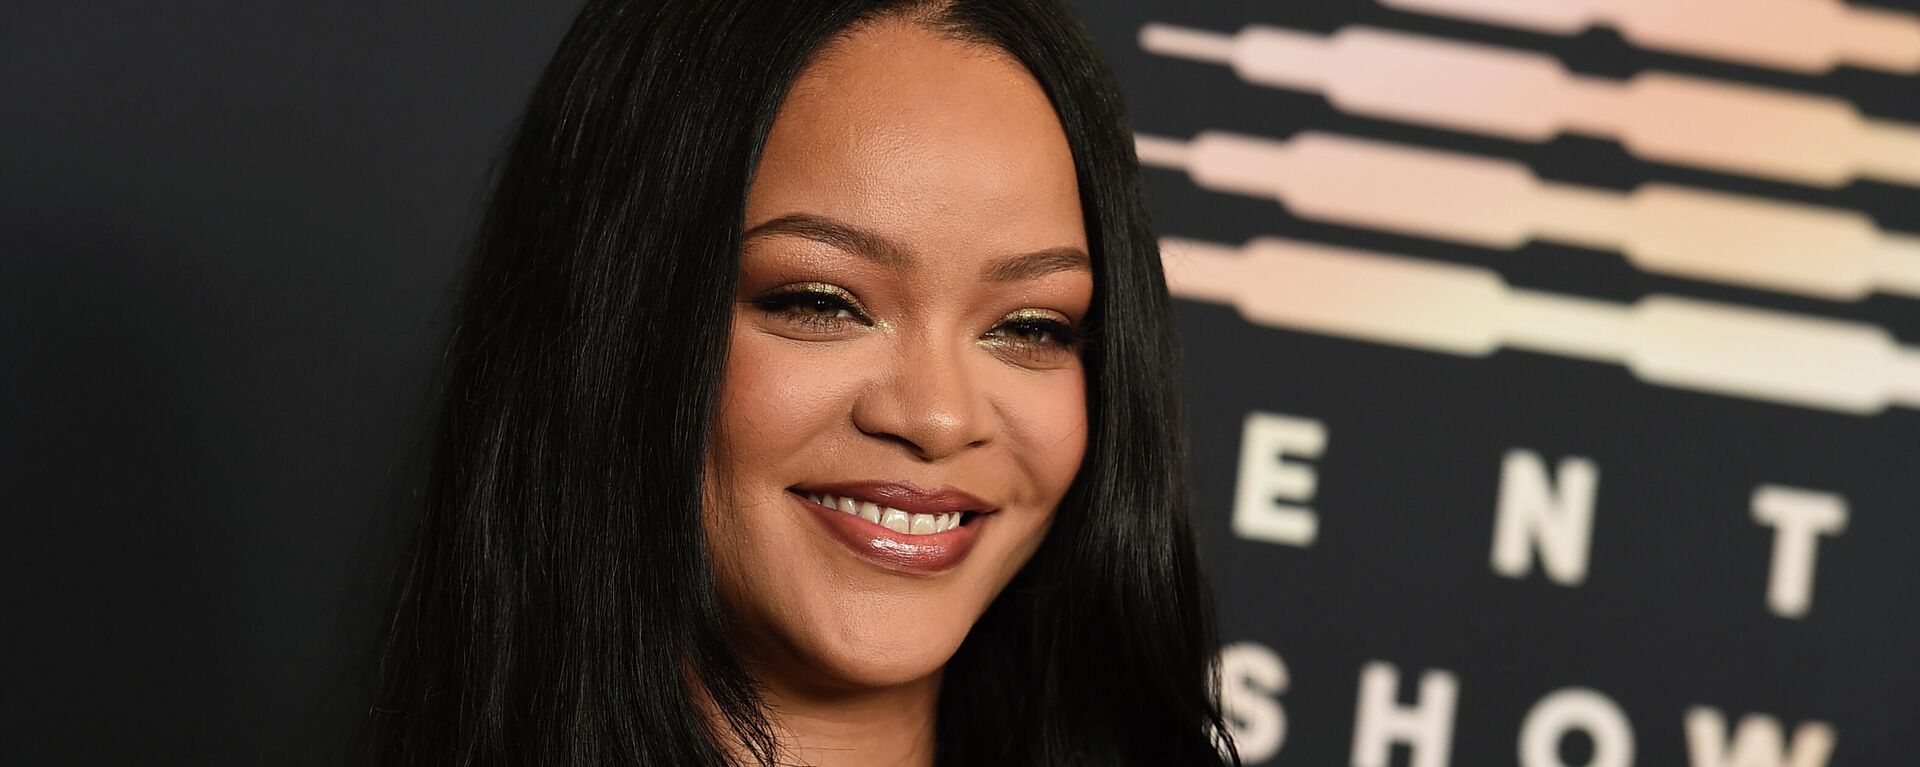 Musician and entrepreneur Rihanna attends an event for her lingerie line Savage X Fenty at the Westin Bonaventure Hotel in Los Angeles on on Aug. 28, 2021. The lingerie fashion show, “Savage X Fenty Show Vol. 3, will premiere Friday on Amazon Prime Video. - Sputnik International, 1920, 11.02.2023